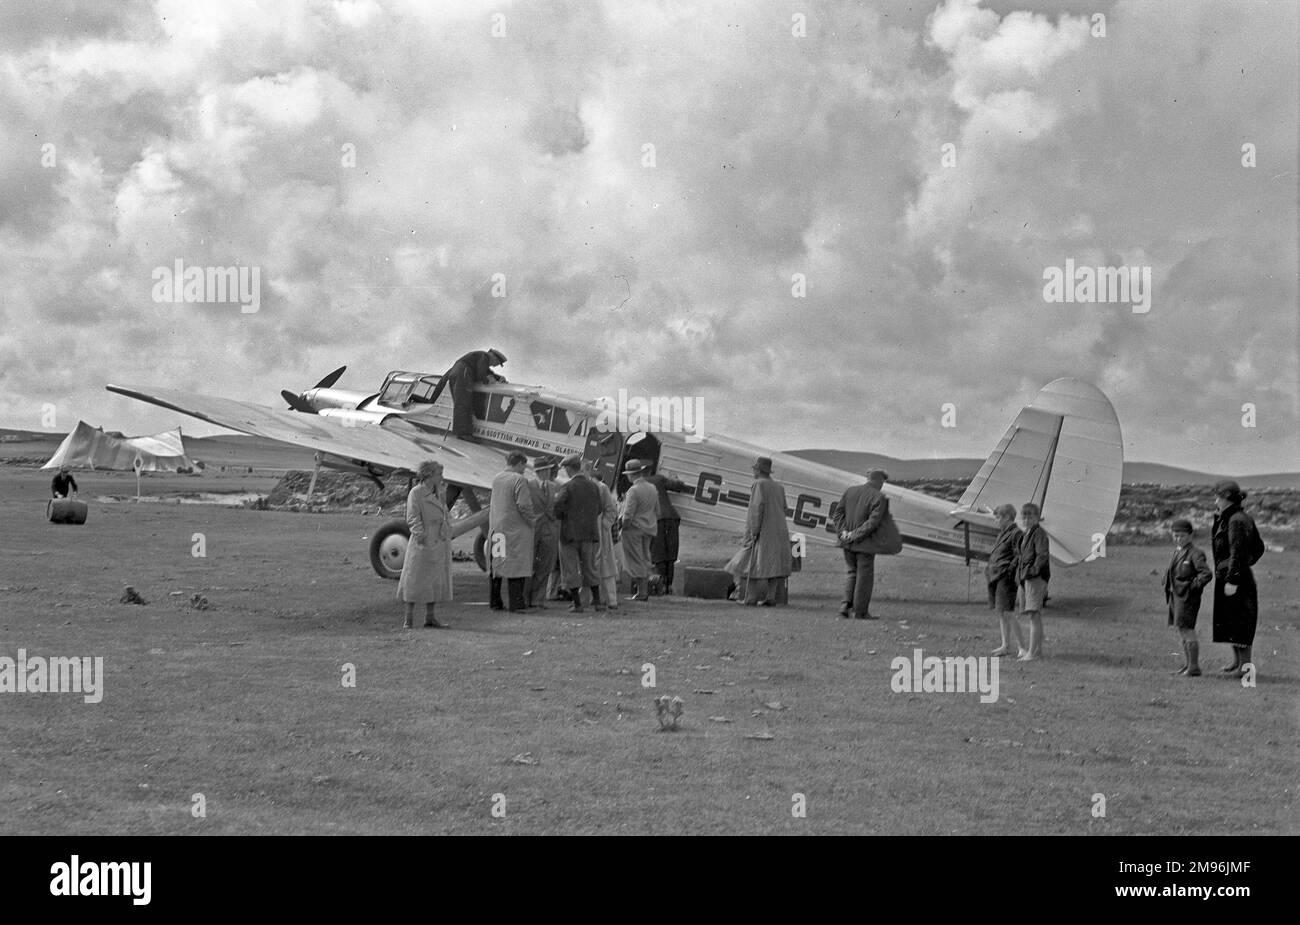 People on an airfield in Scotland with a light aircraft belonging to Northern & Scottish Airways Ltd of Glasgow. The G-ACSM was a Spartan Cruiser with three engines. Stock Photo